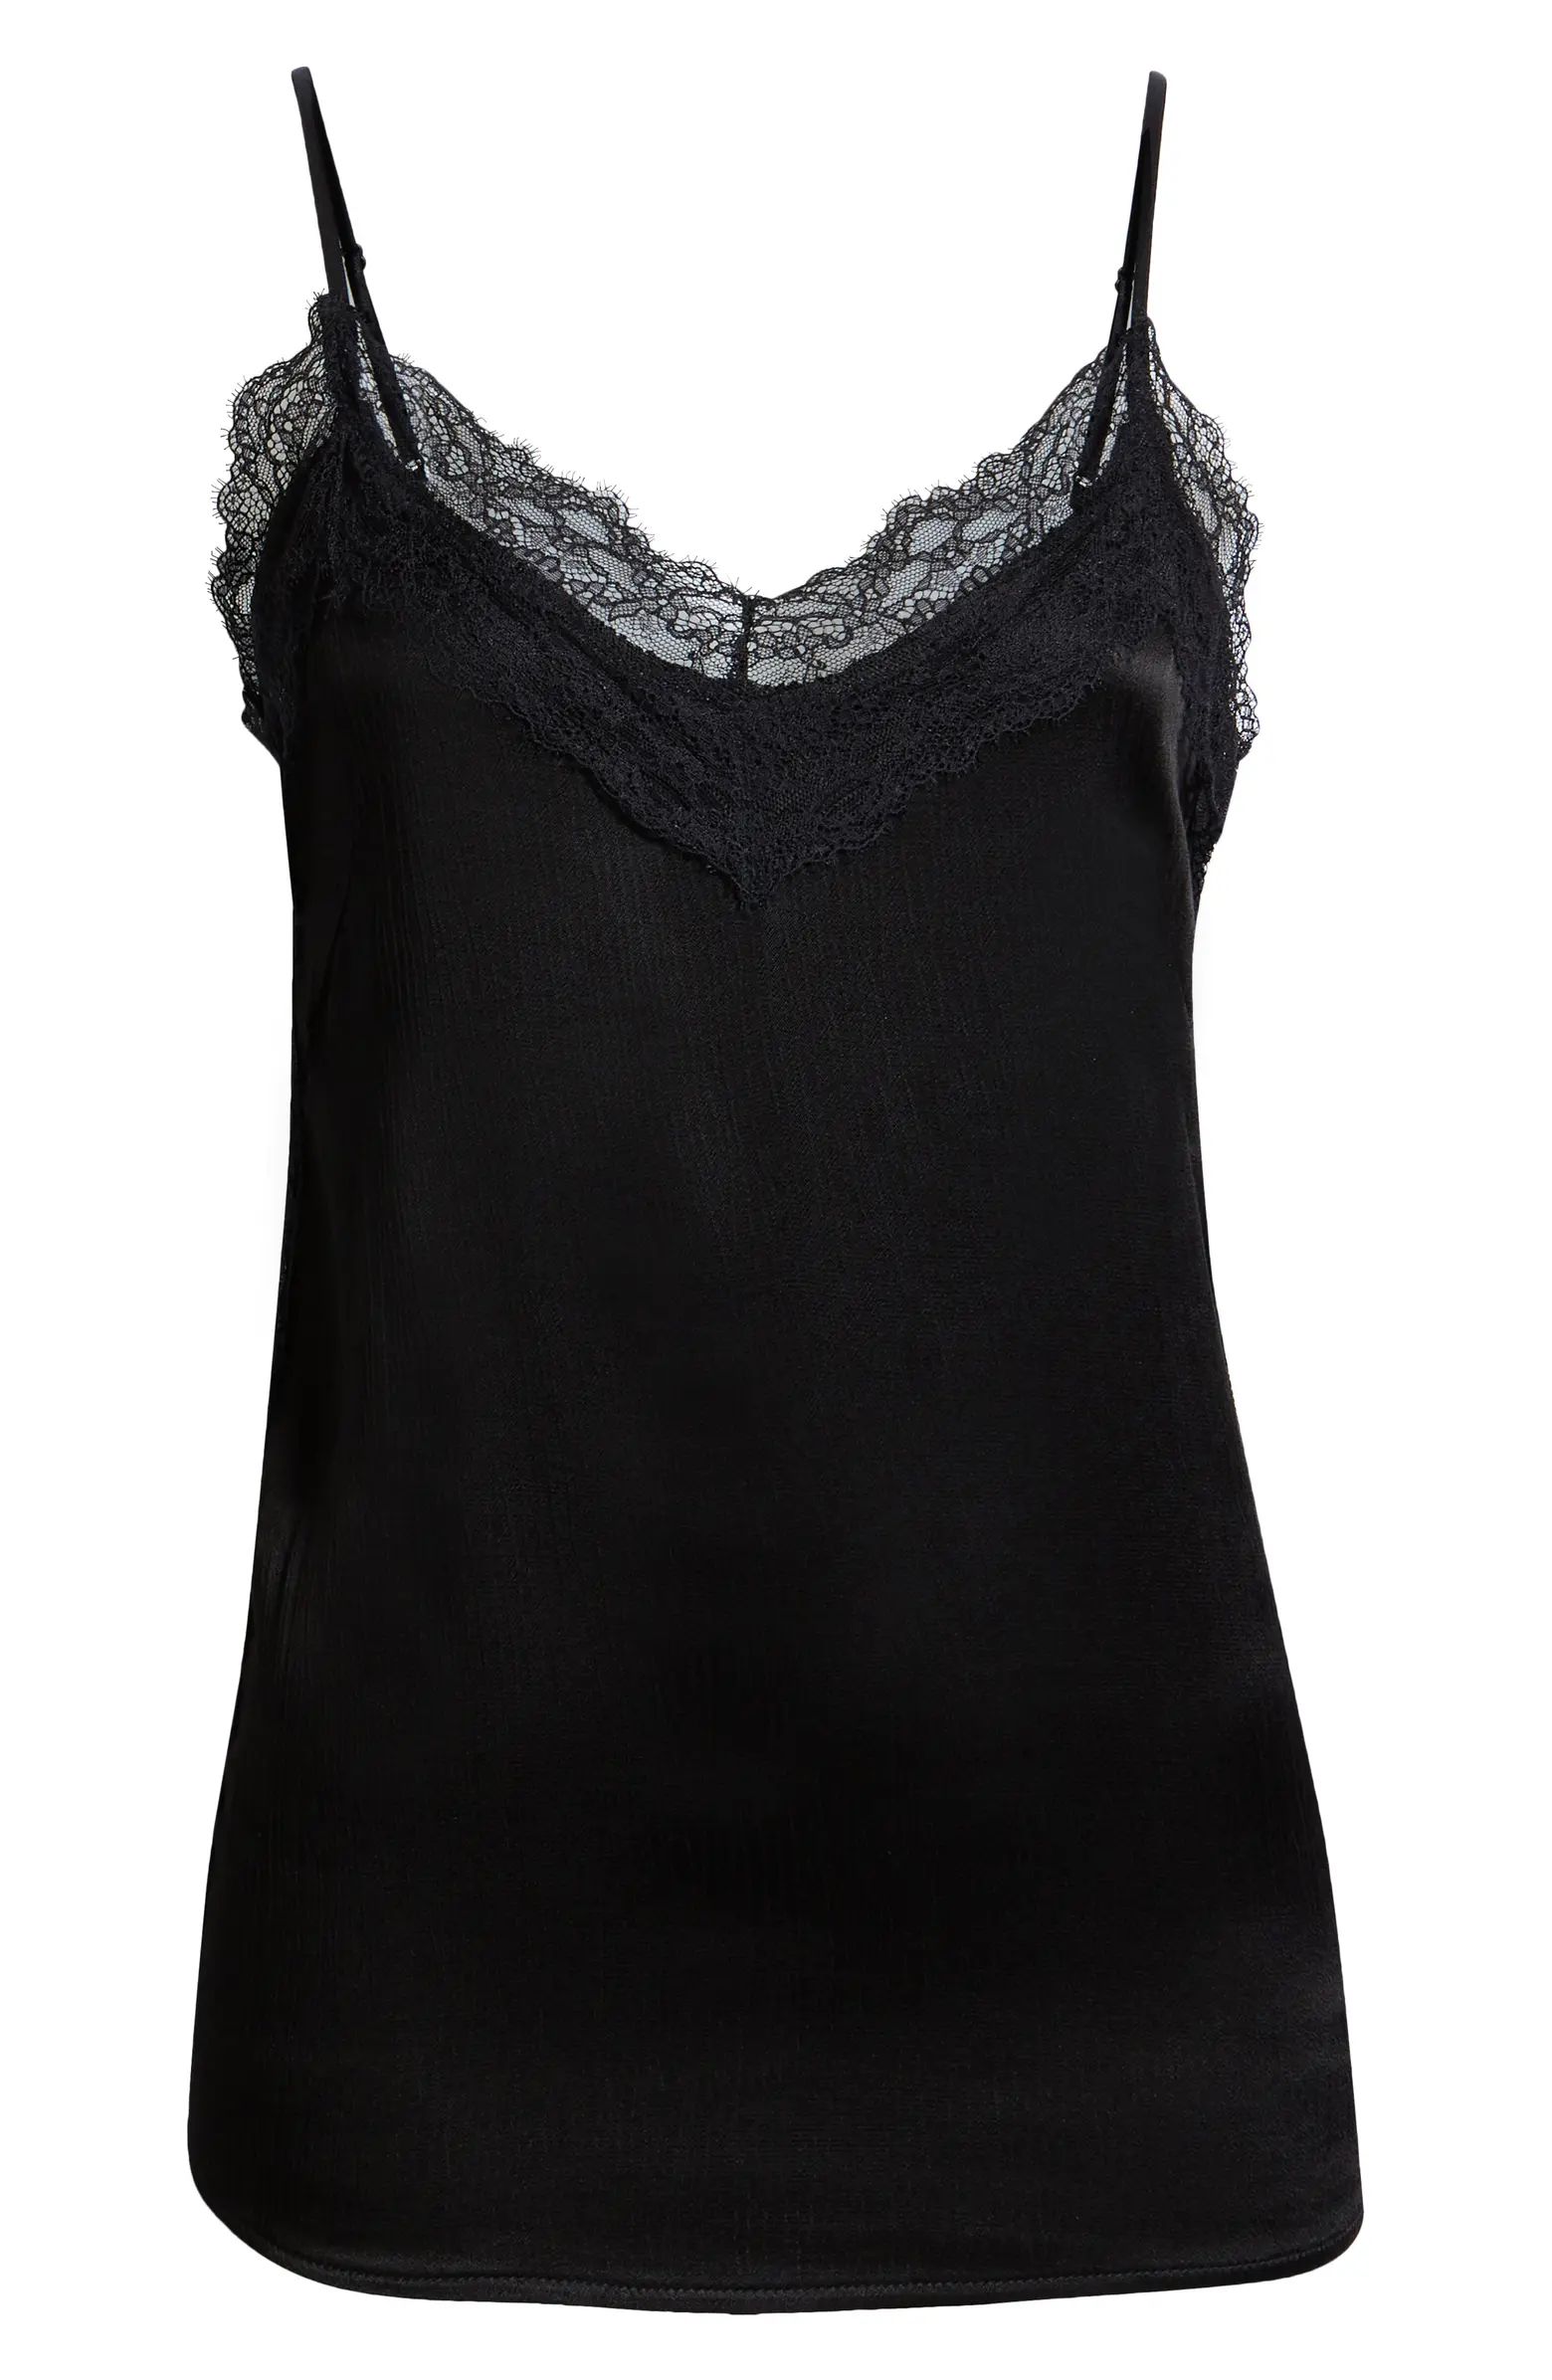 Lace Trim Camisole Top | Nordstrom